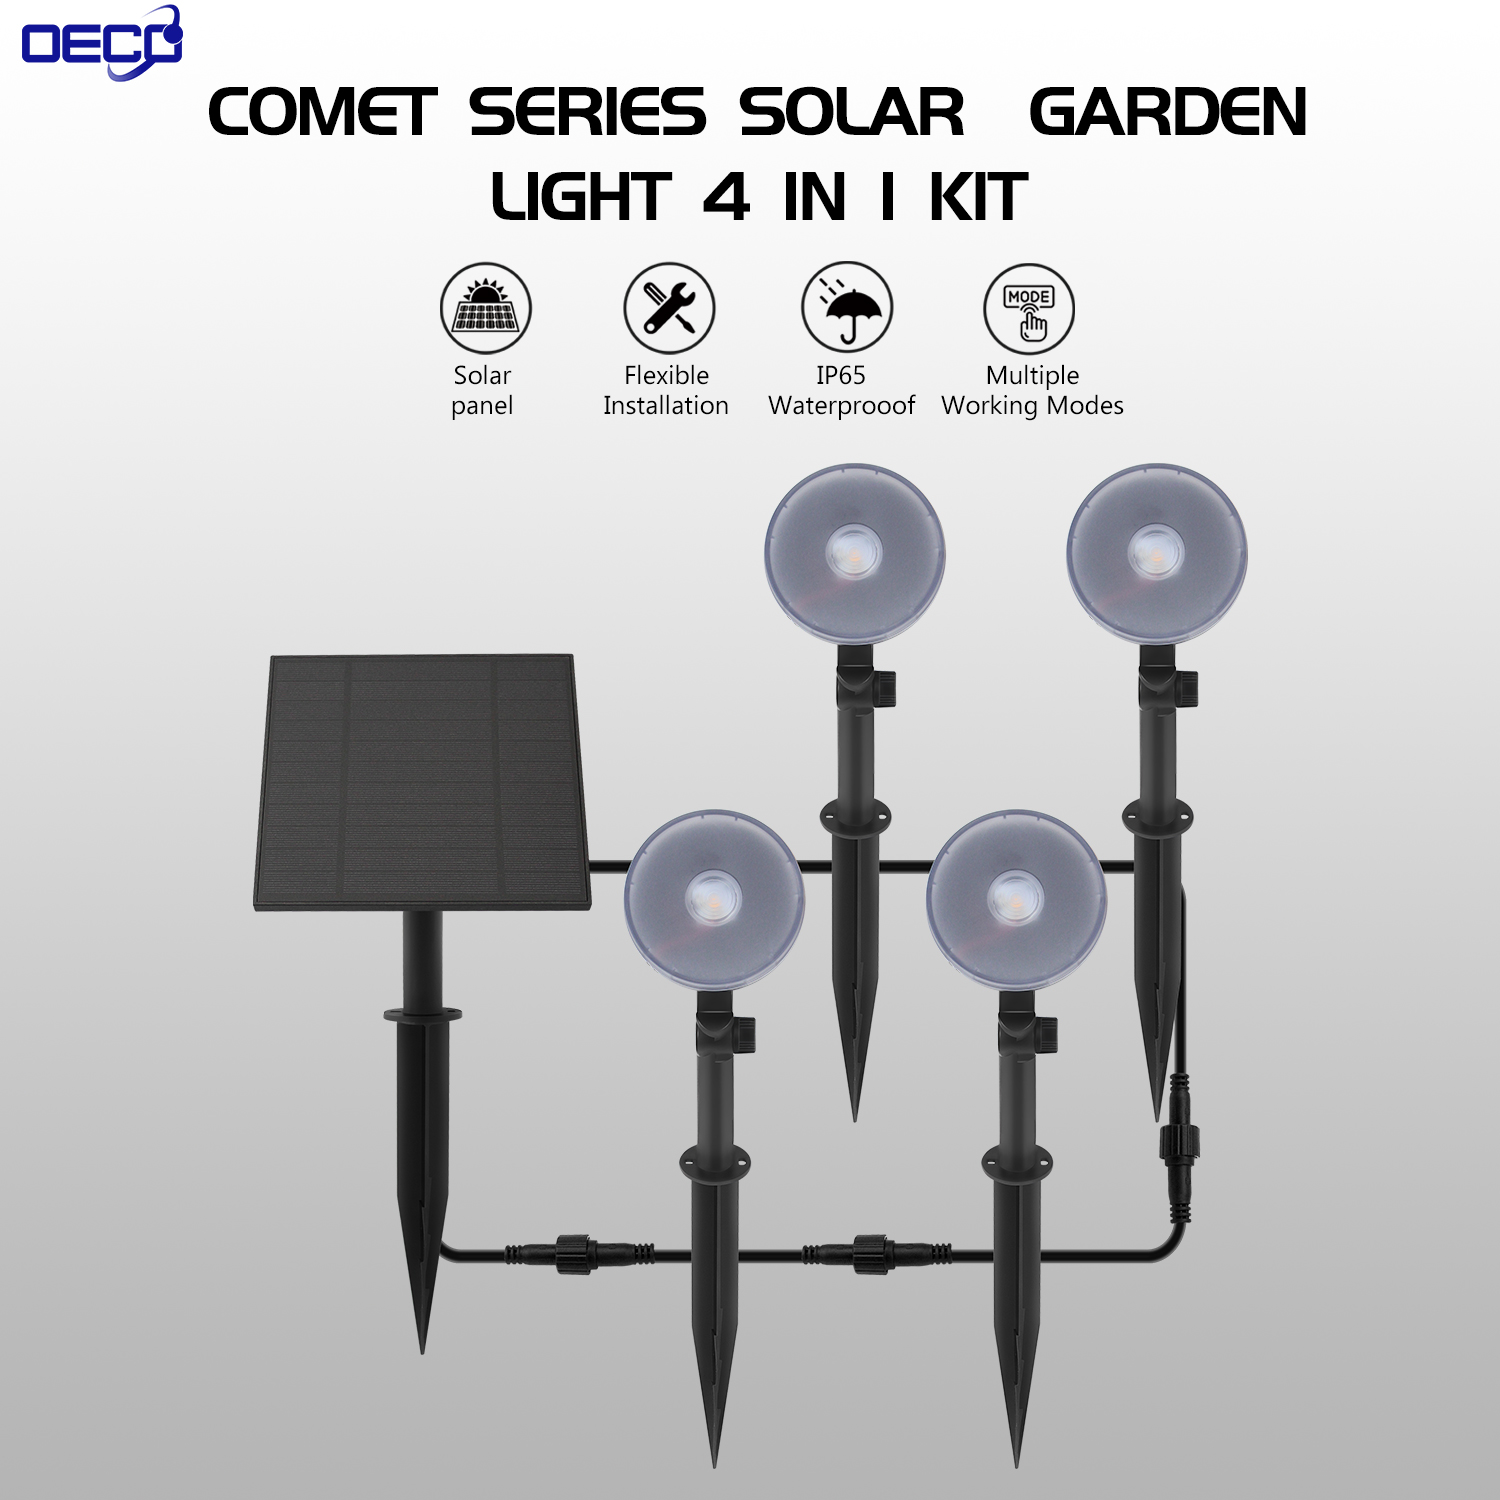 4 In 1 Solar Garden Lights With Ground & Wall For Landscape Pathway Separate Solar Lamps